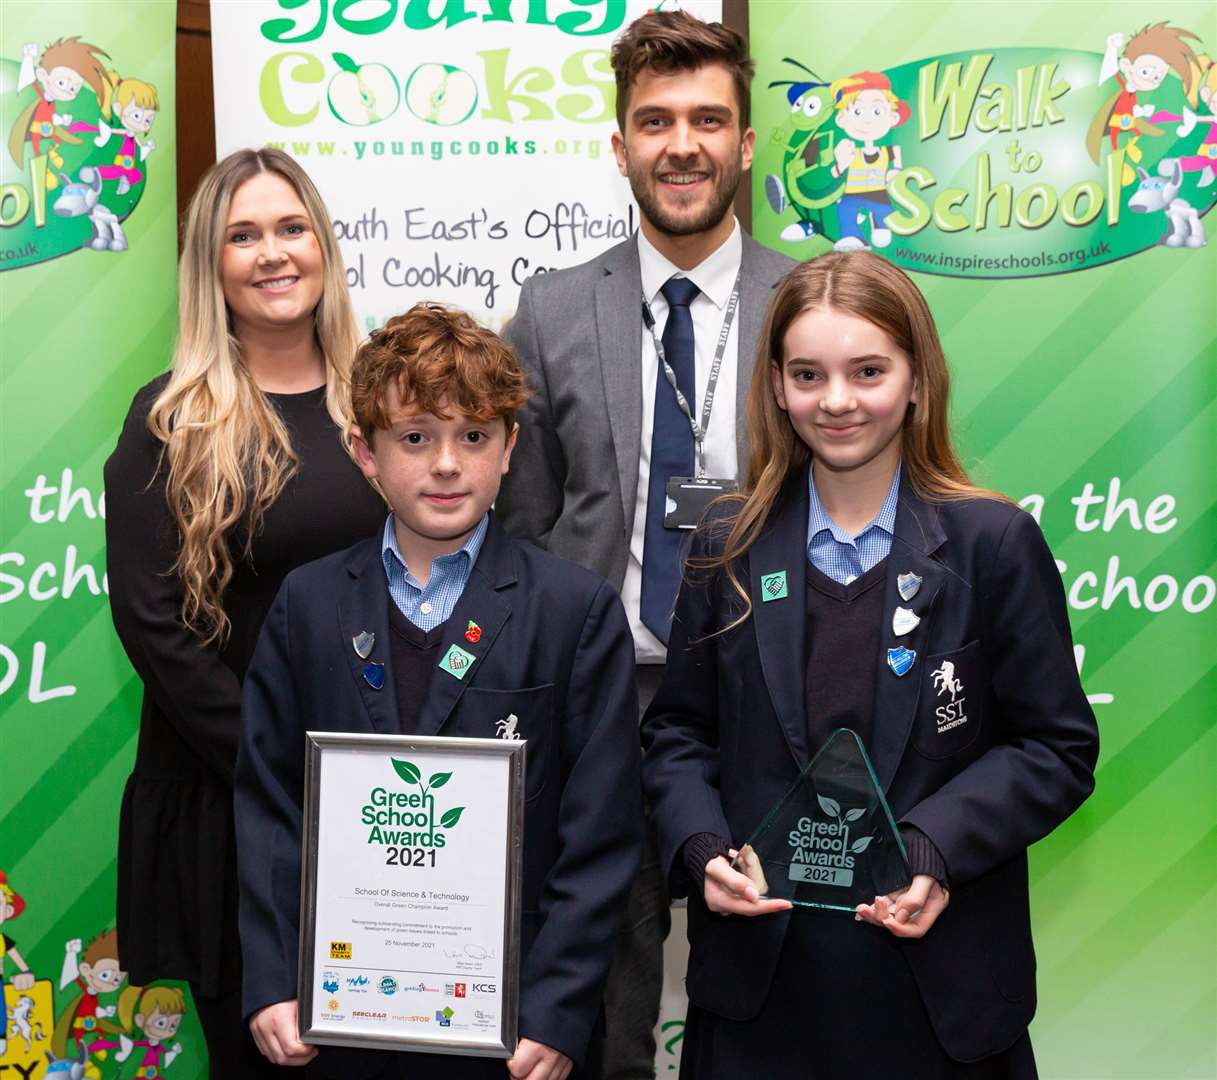 Green Champion Award went to School of Science & Technology, Maidstone at the Kent Green School Awards Picture: Countrywide Photographic